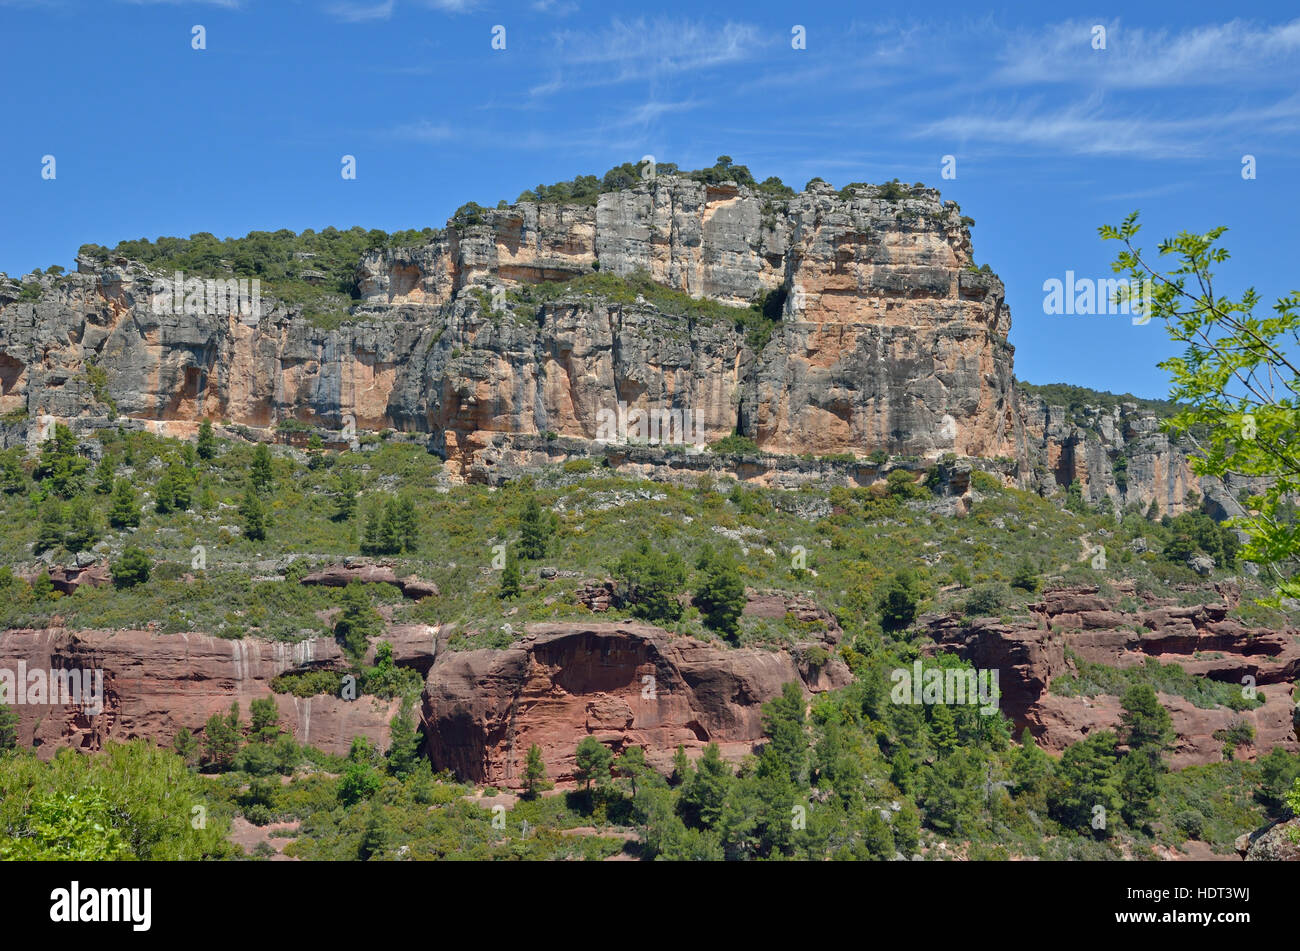 Siurana is a world-class climbing destination. There are steep walls, slabs, overhangs and other limestone landforms in the Prades mountains overgrown Stock Photo